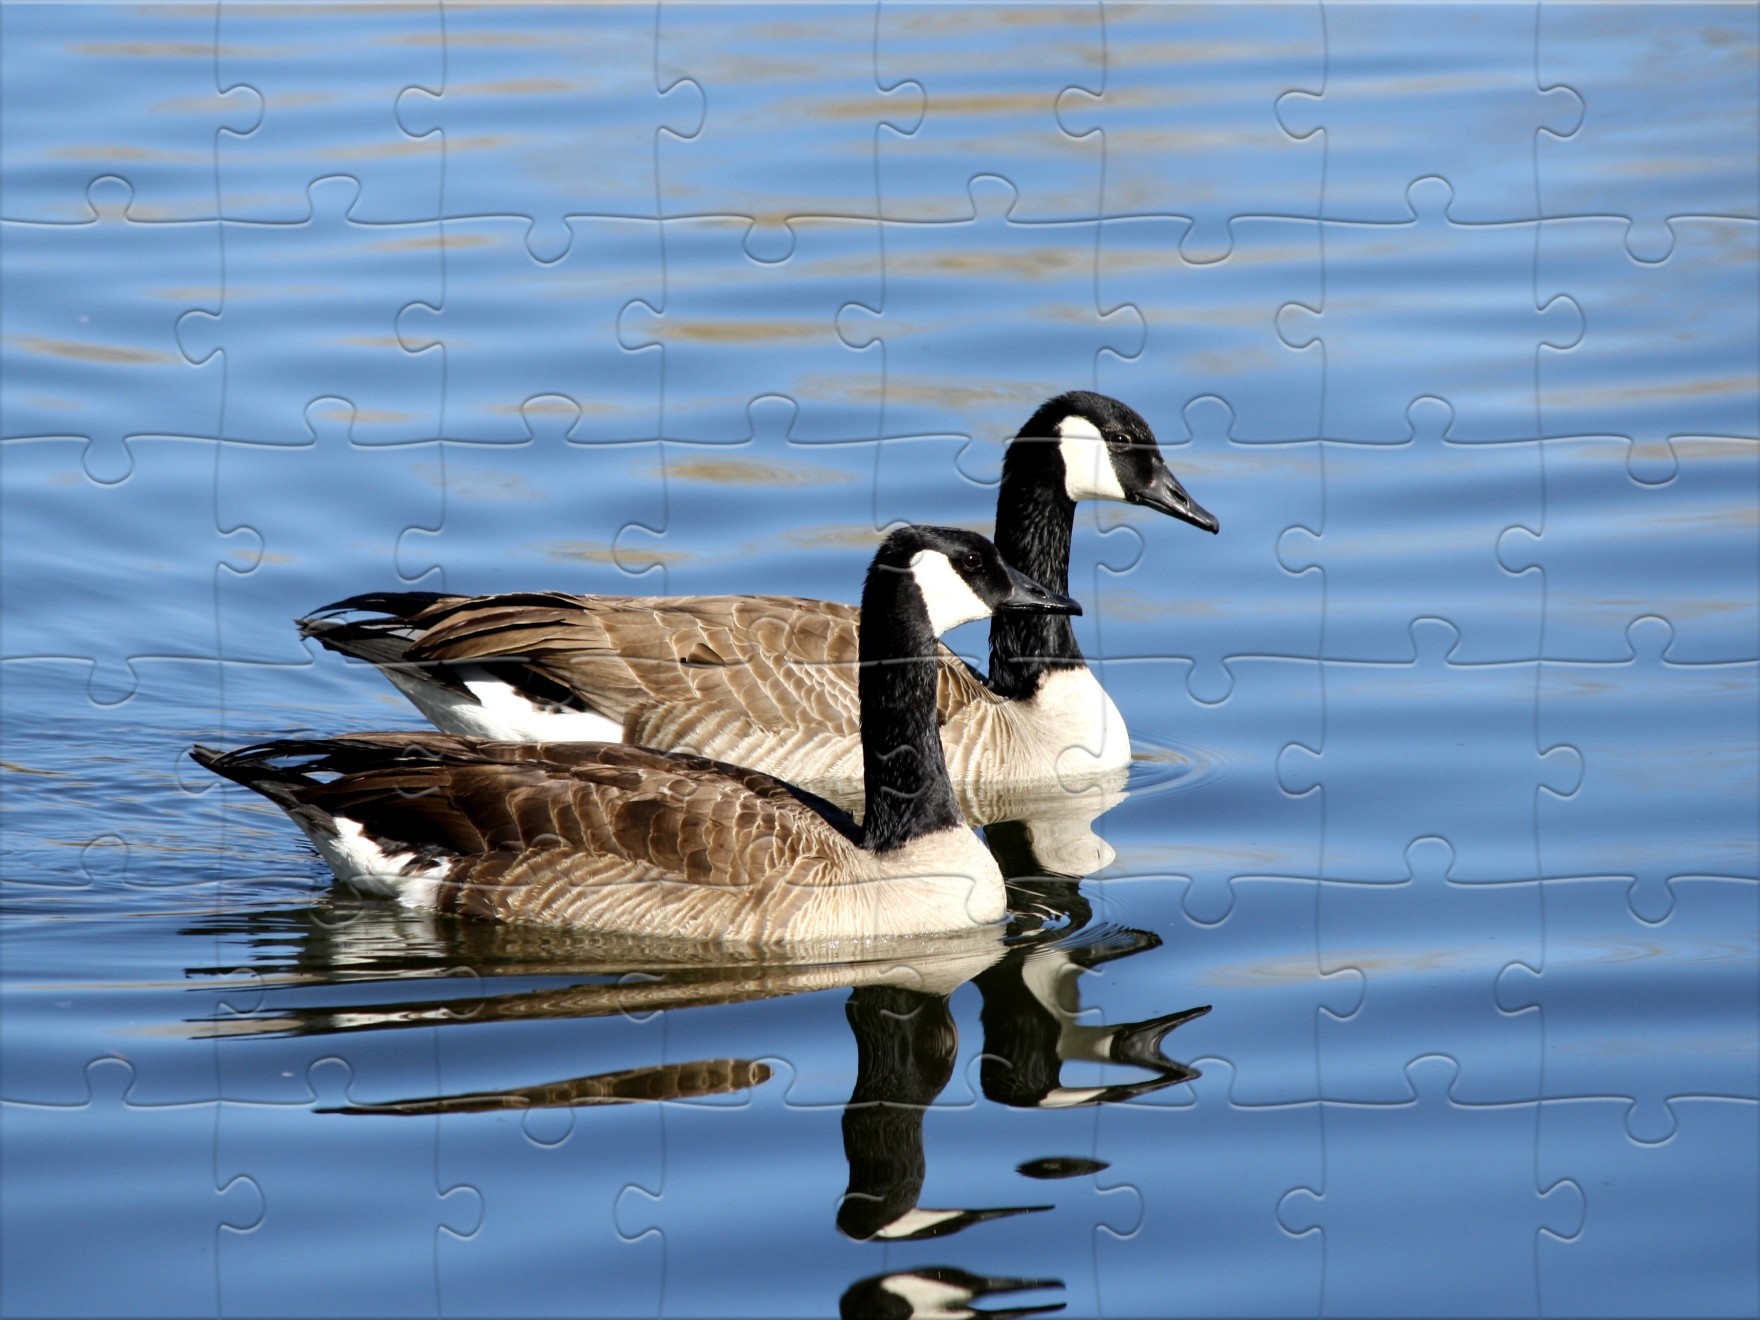 48 Pieces Jigsaw puzzle Canadian Geese